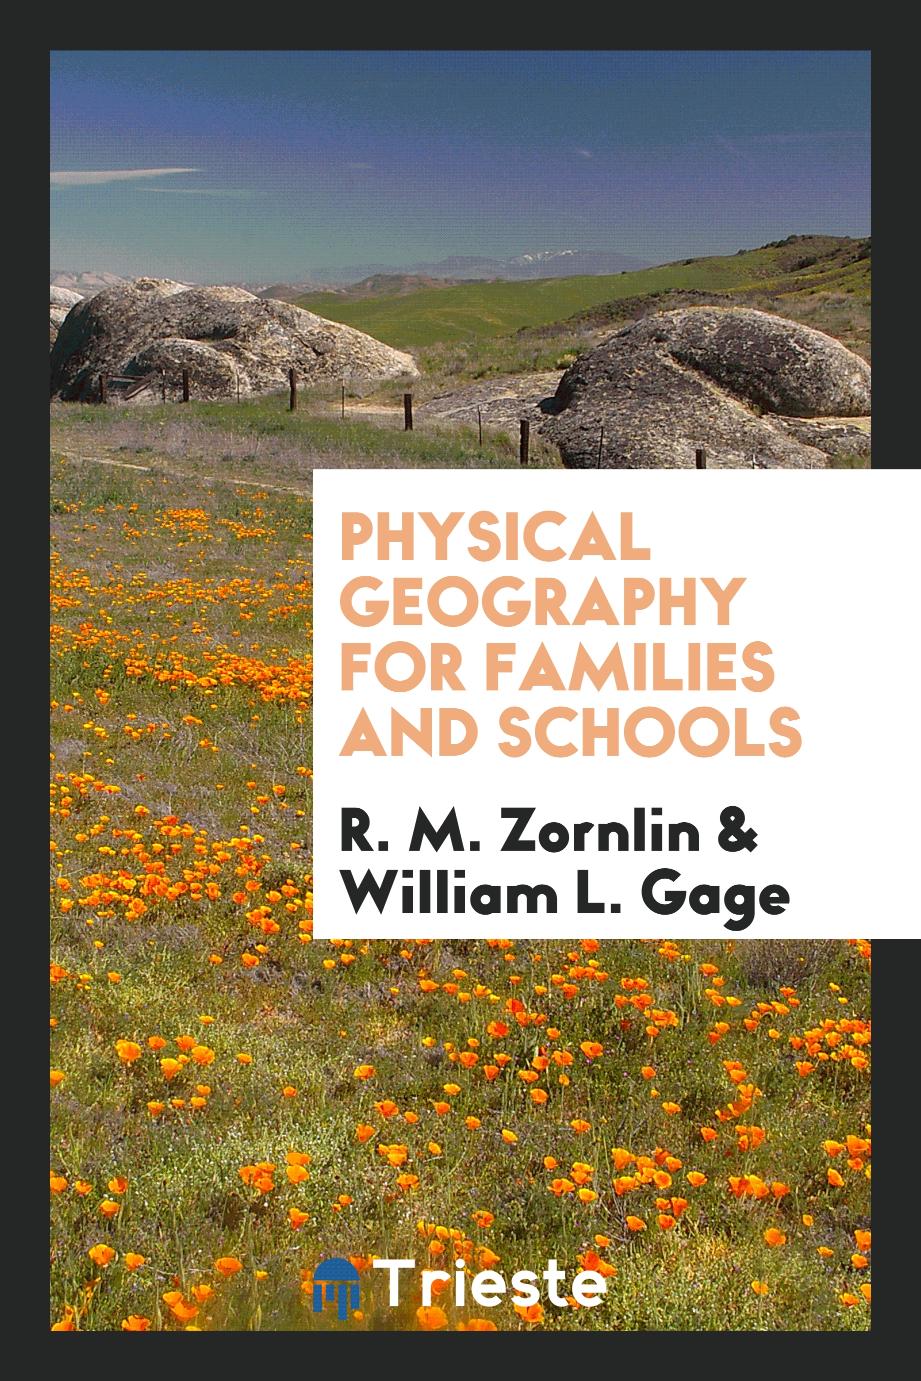 Physical geography for families and schools